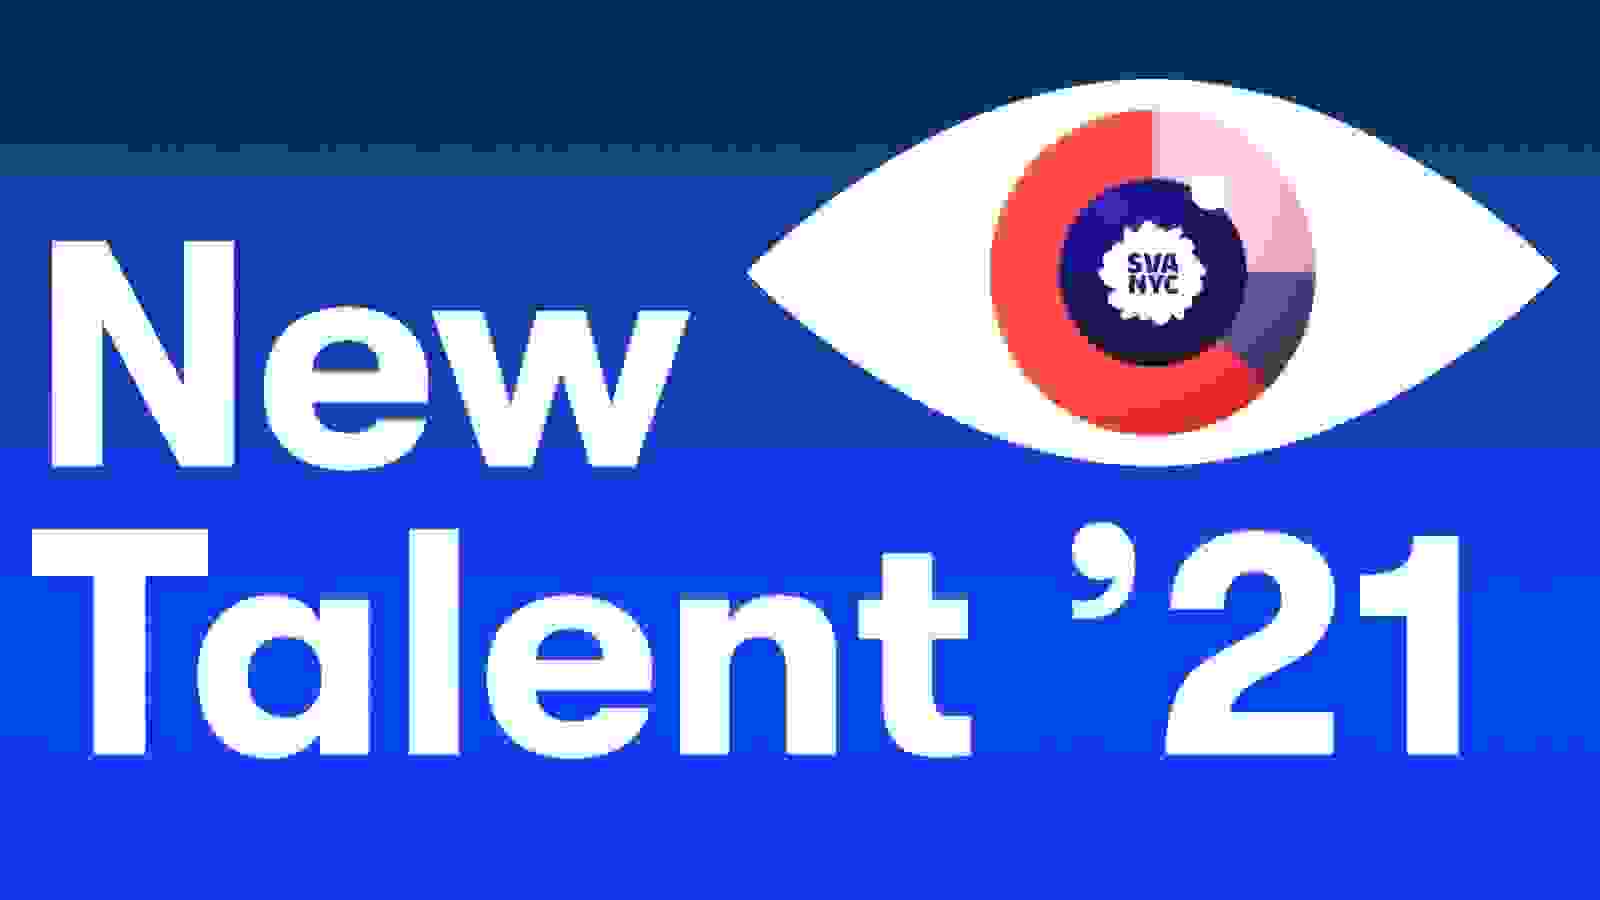 "New Talent '21" written on blue background with a large stylized eye graphic in the upper right corner.